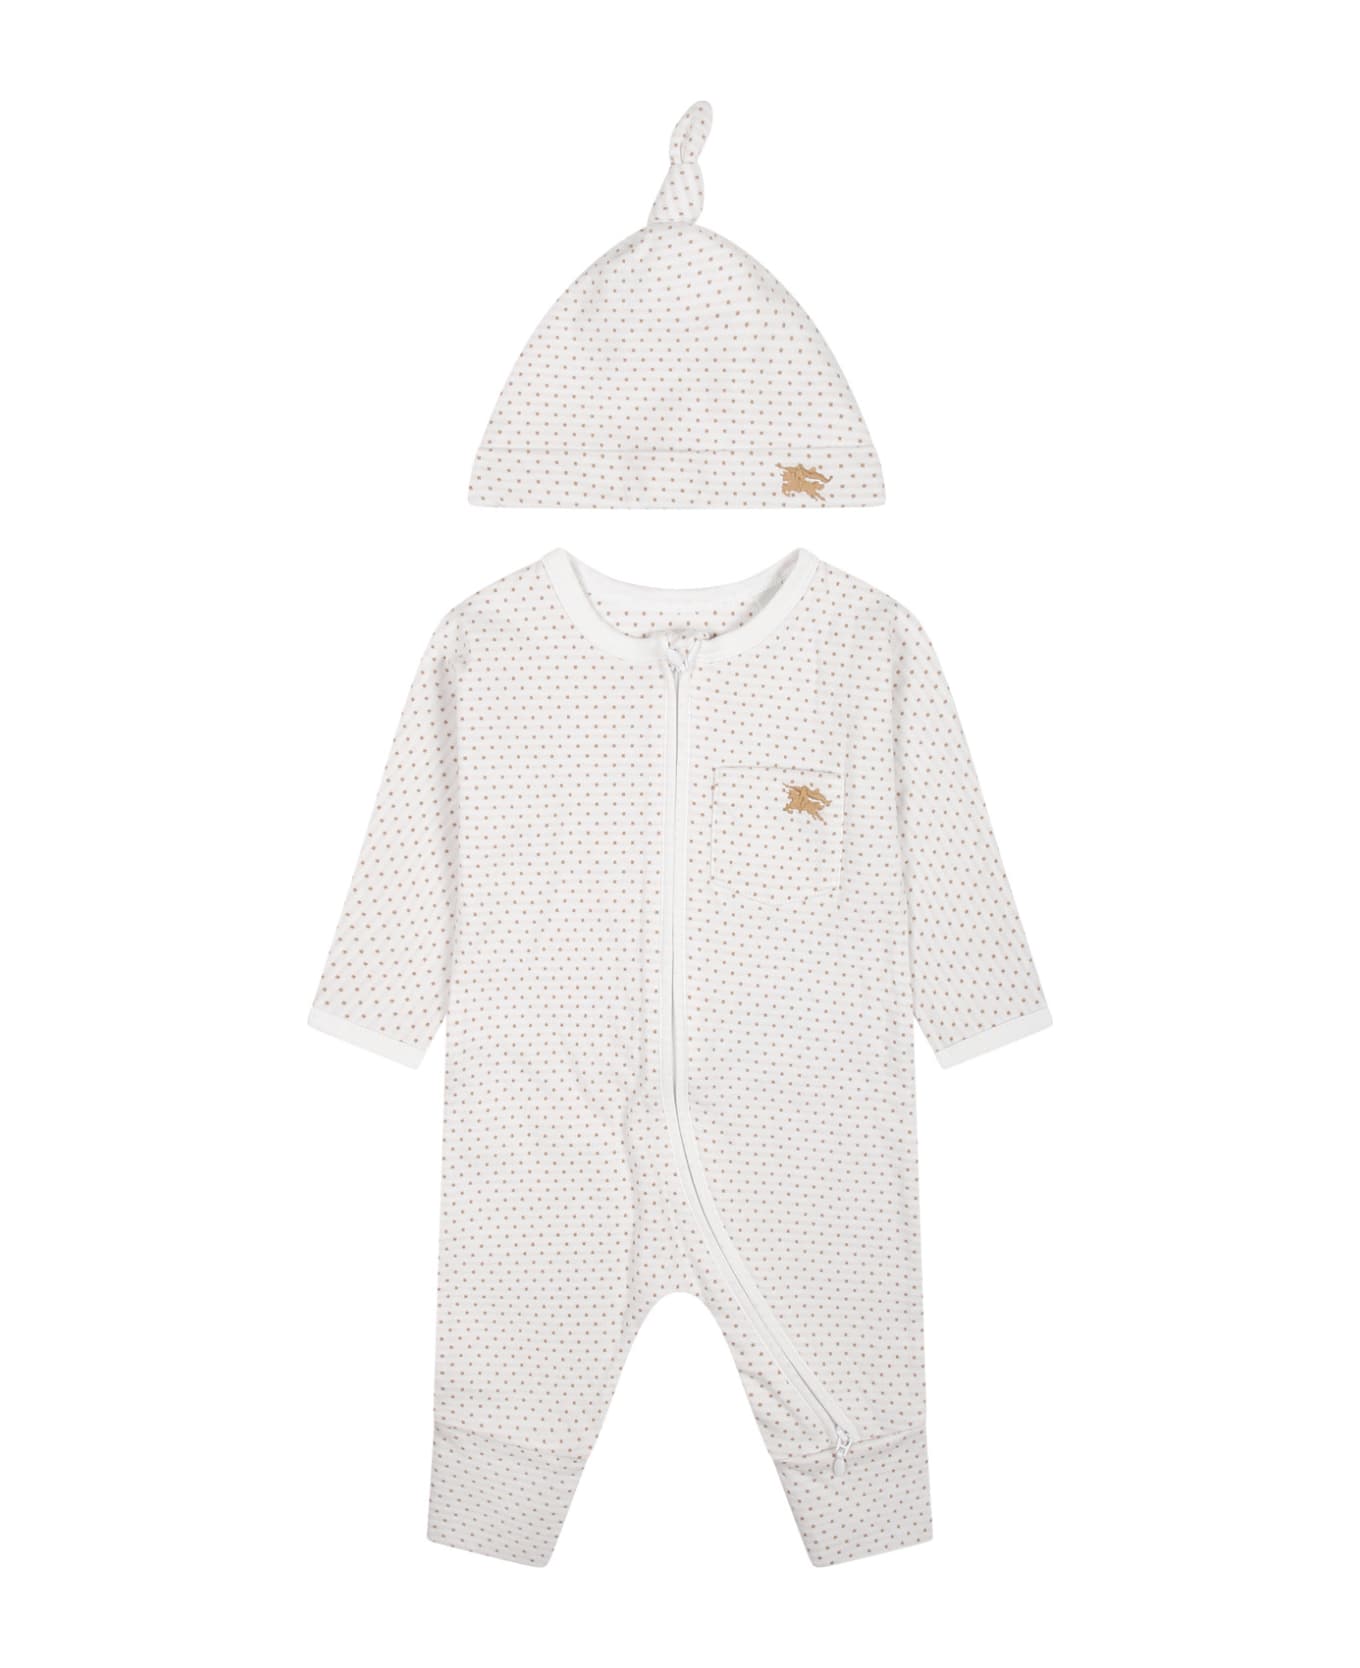 Burberry White Set For Babies With Polka Dots And Logo - White